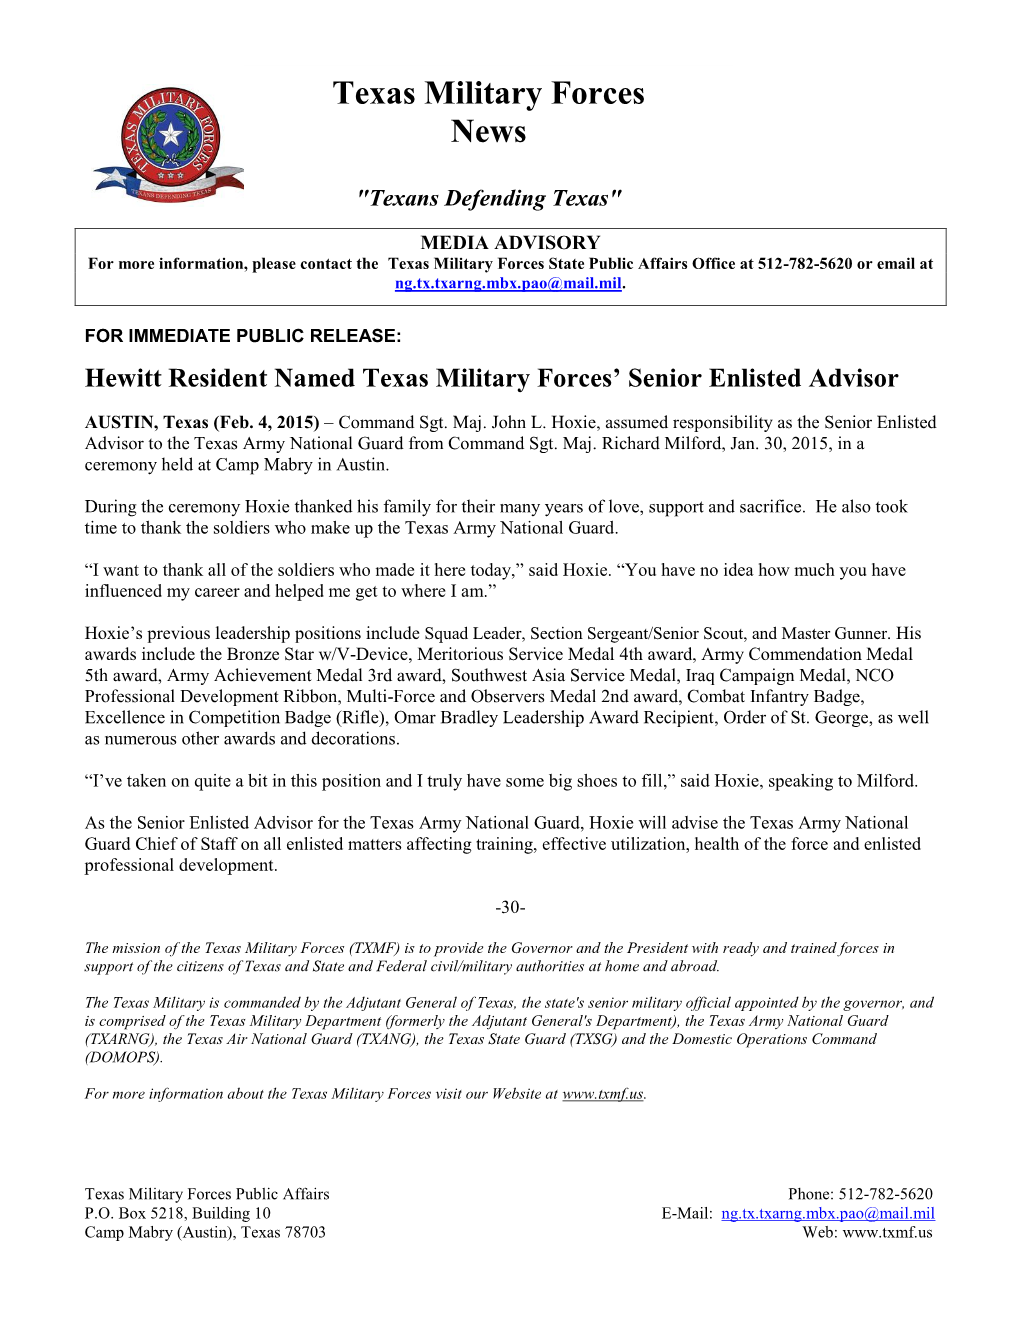 Texas Military Forces News